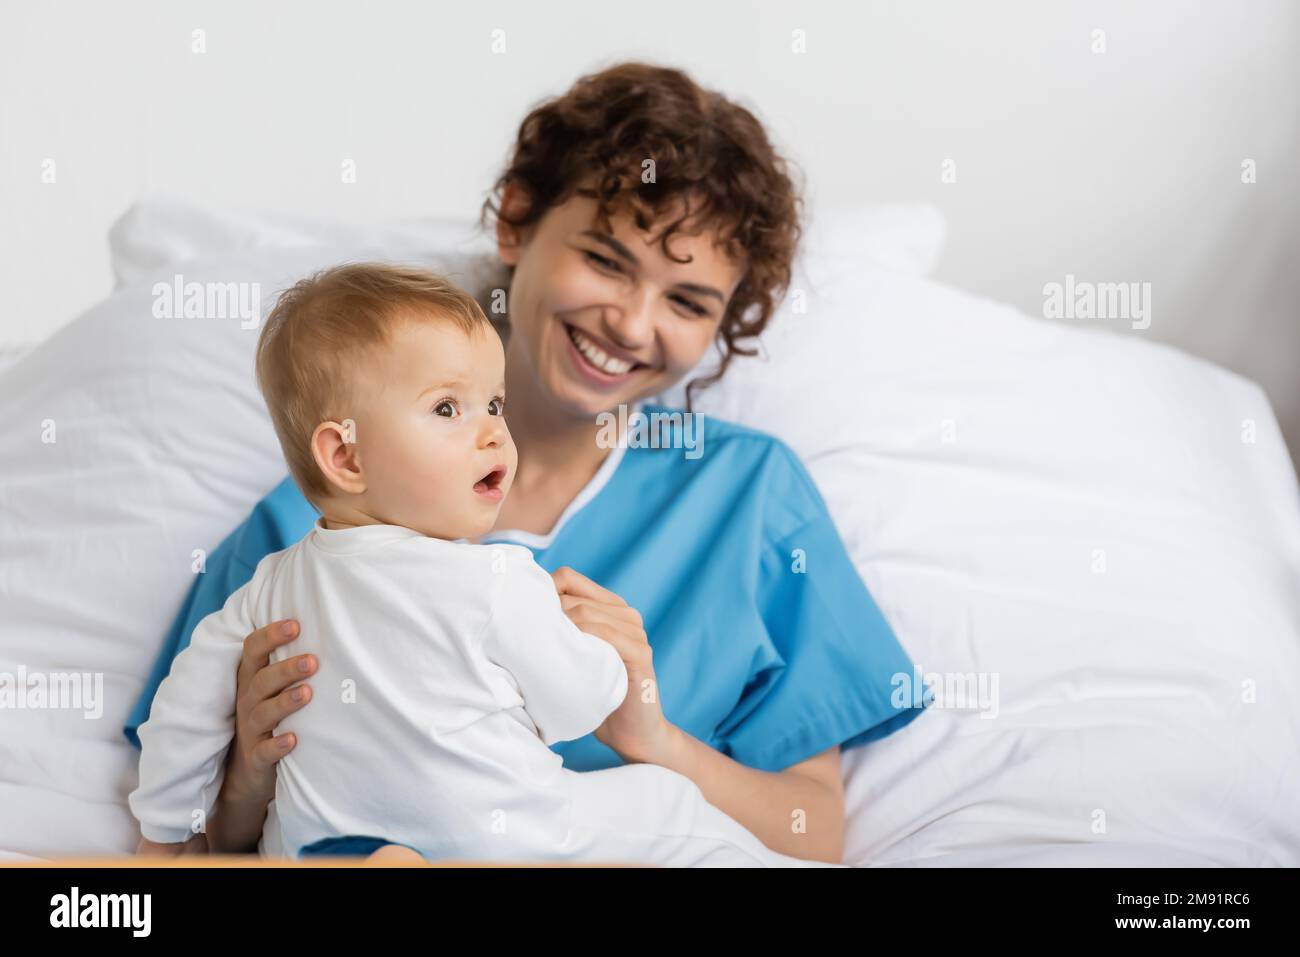 little baby with open mouth looking away near smiling mother in hospital ward,stock image Stock Photo